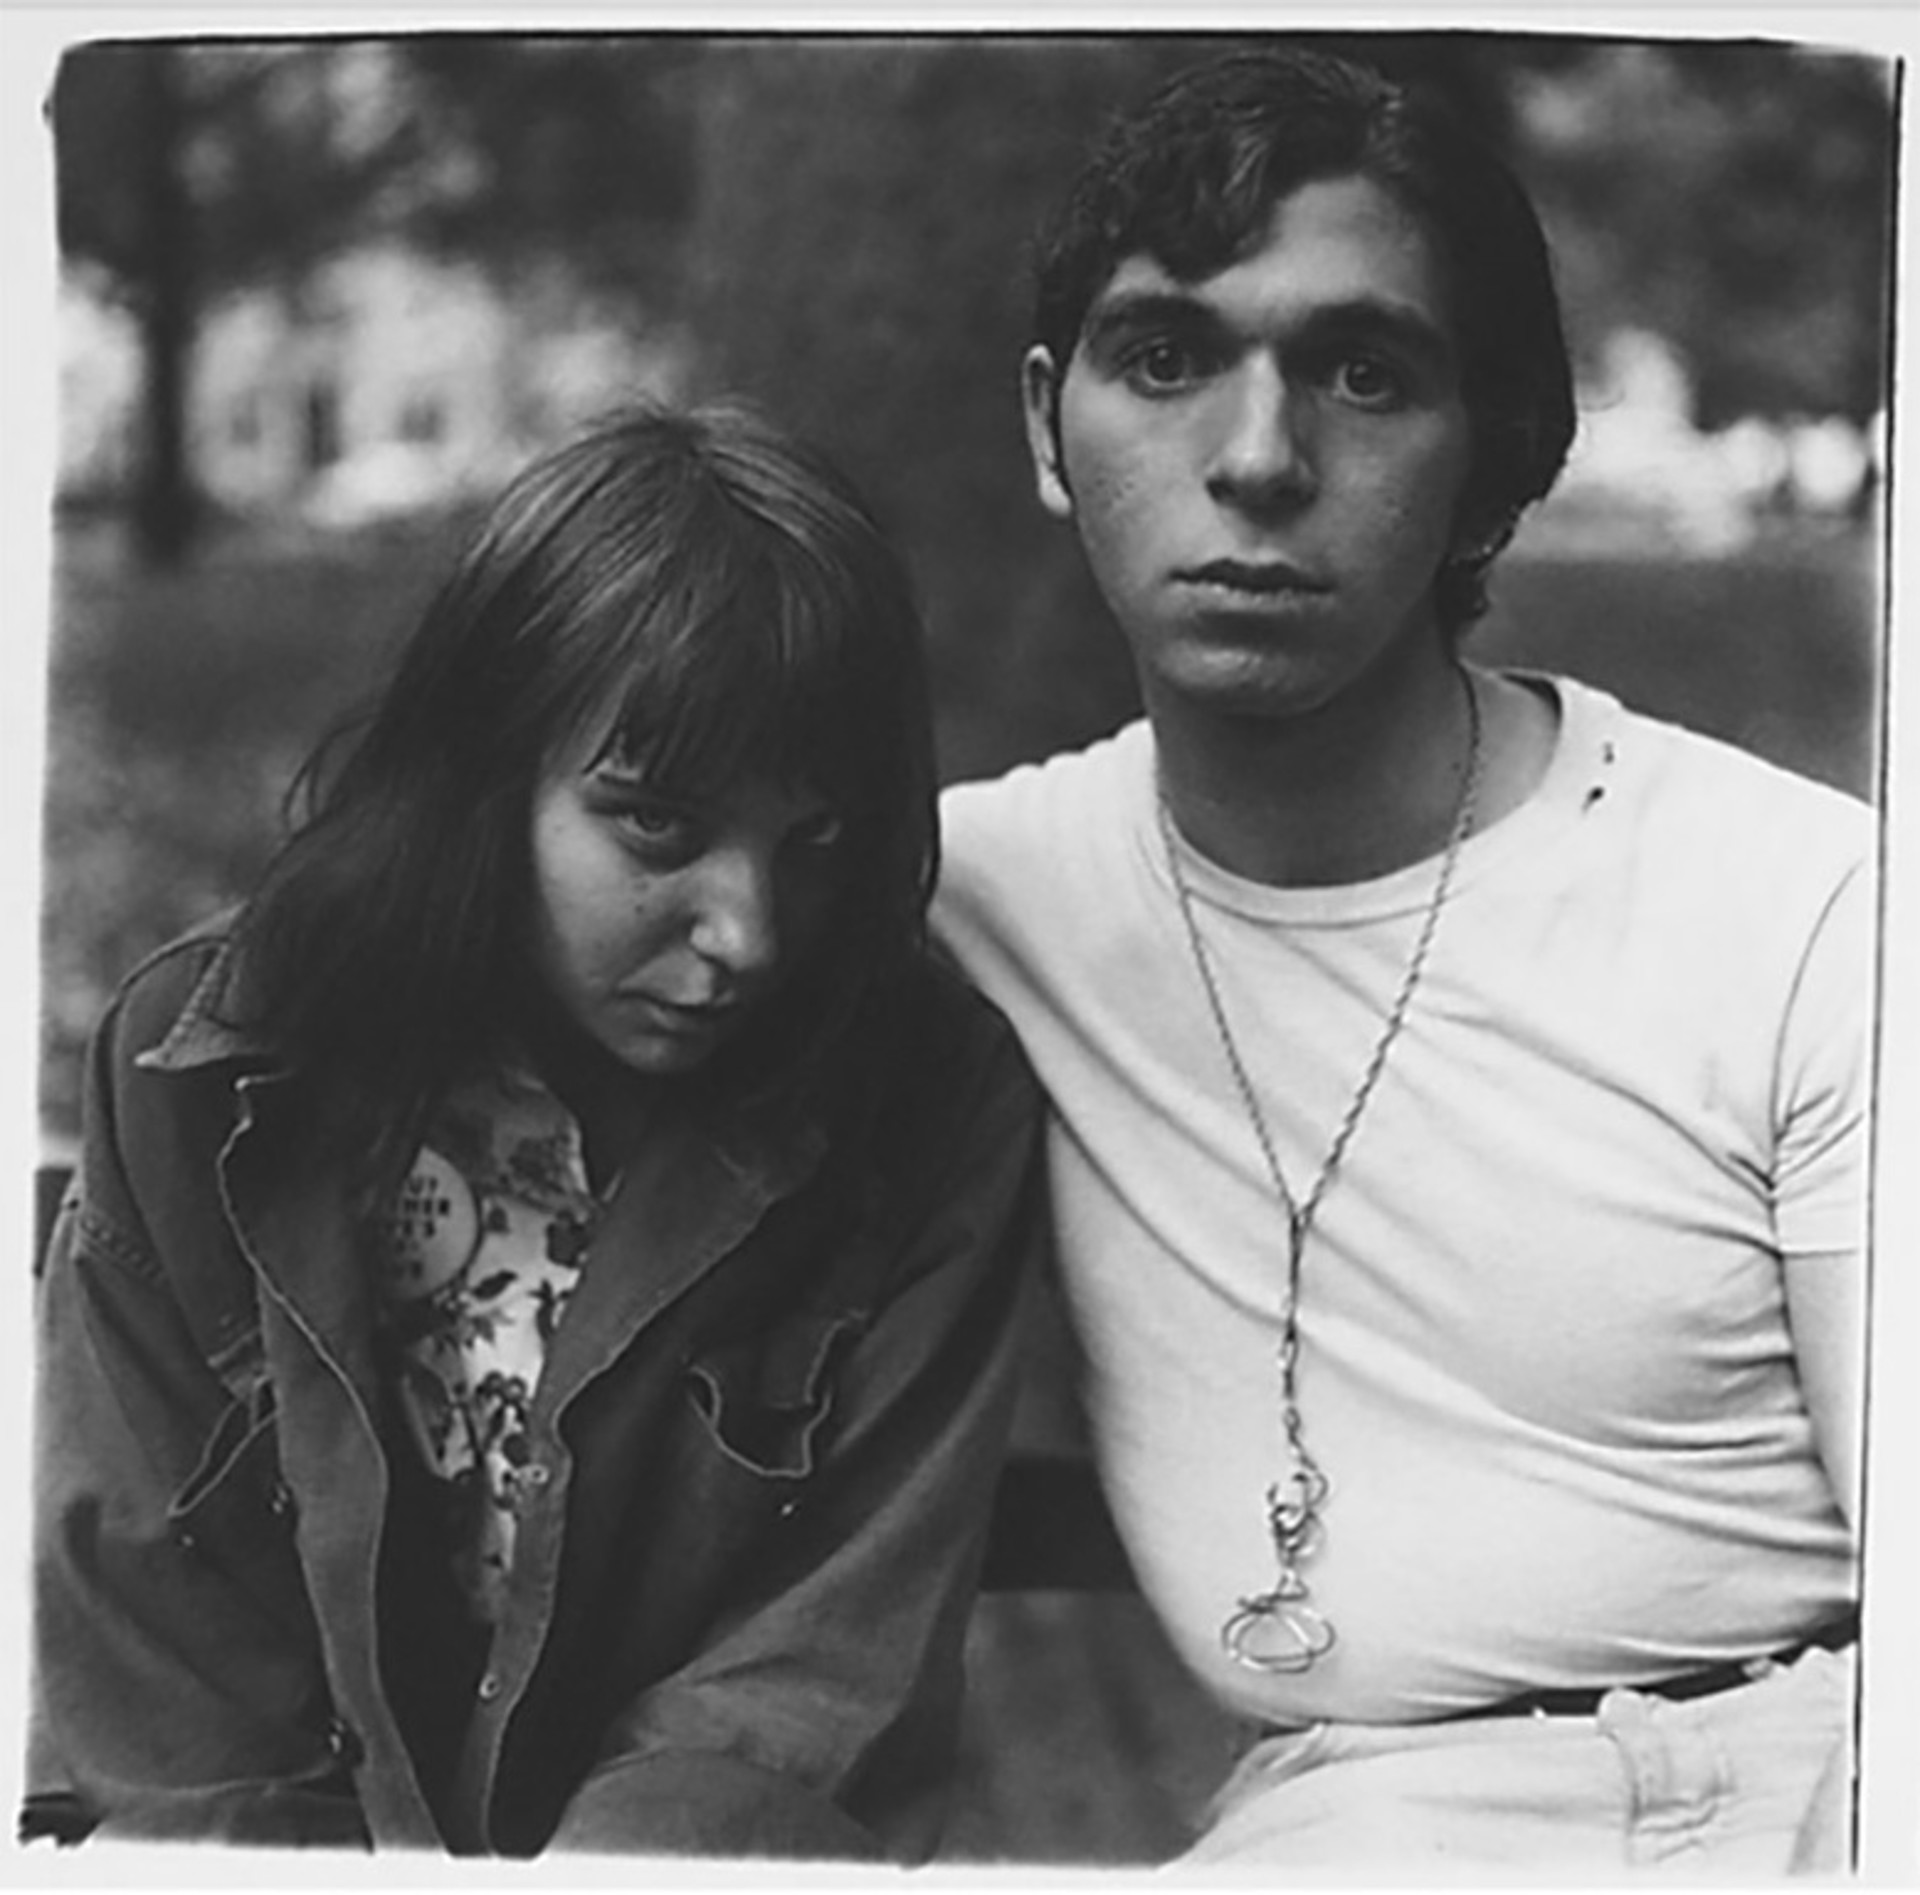 Girl and Boy in Wash Sq Park NYC by Diane Arbus